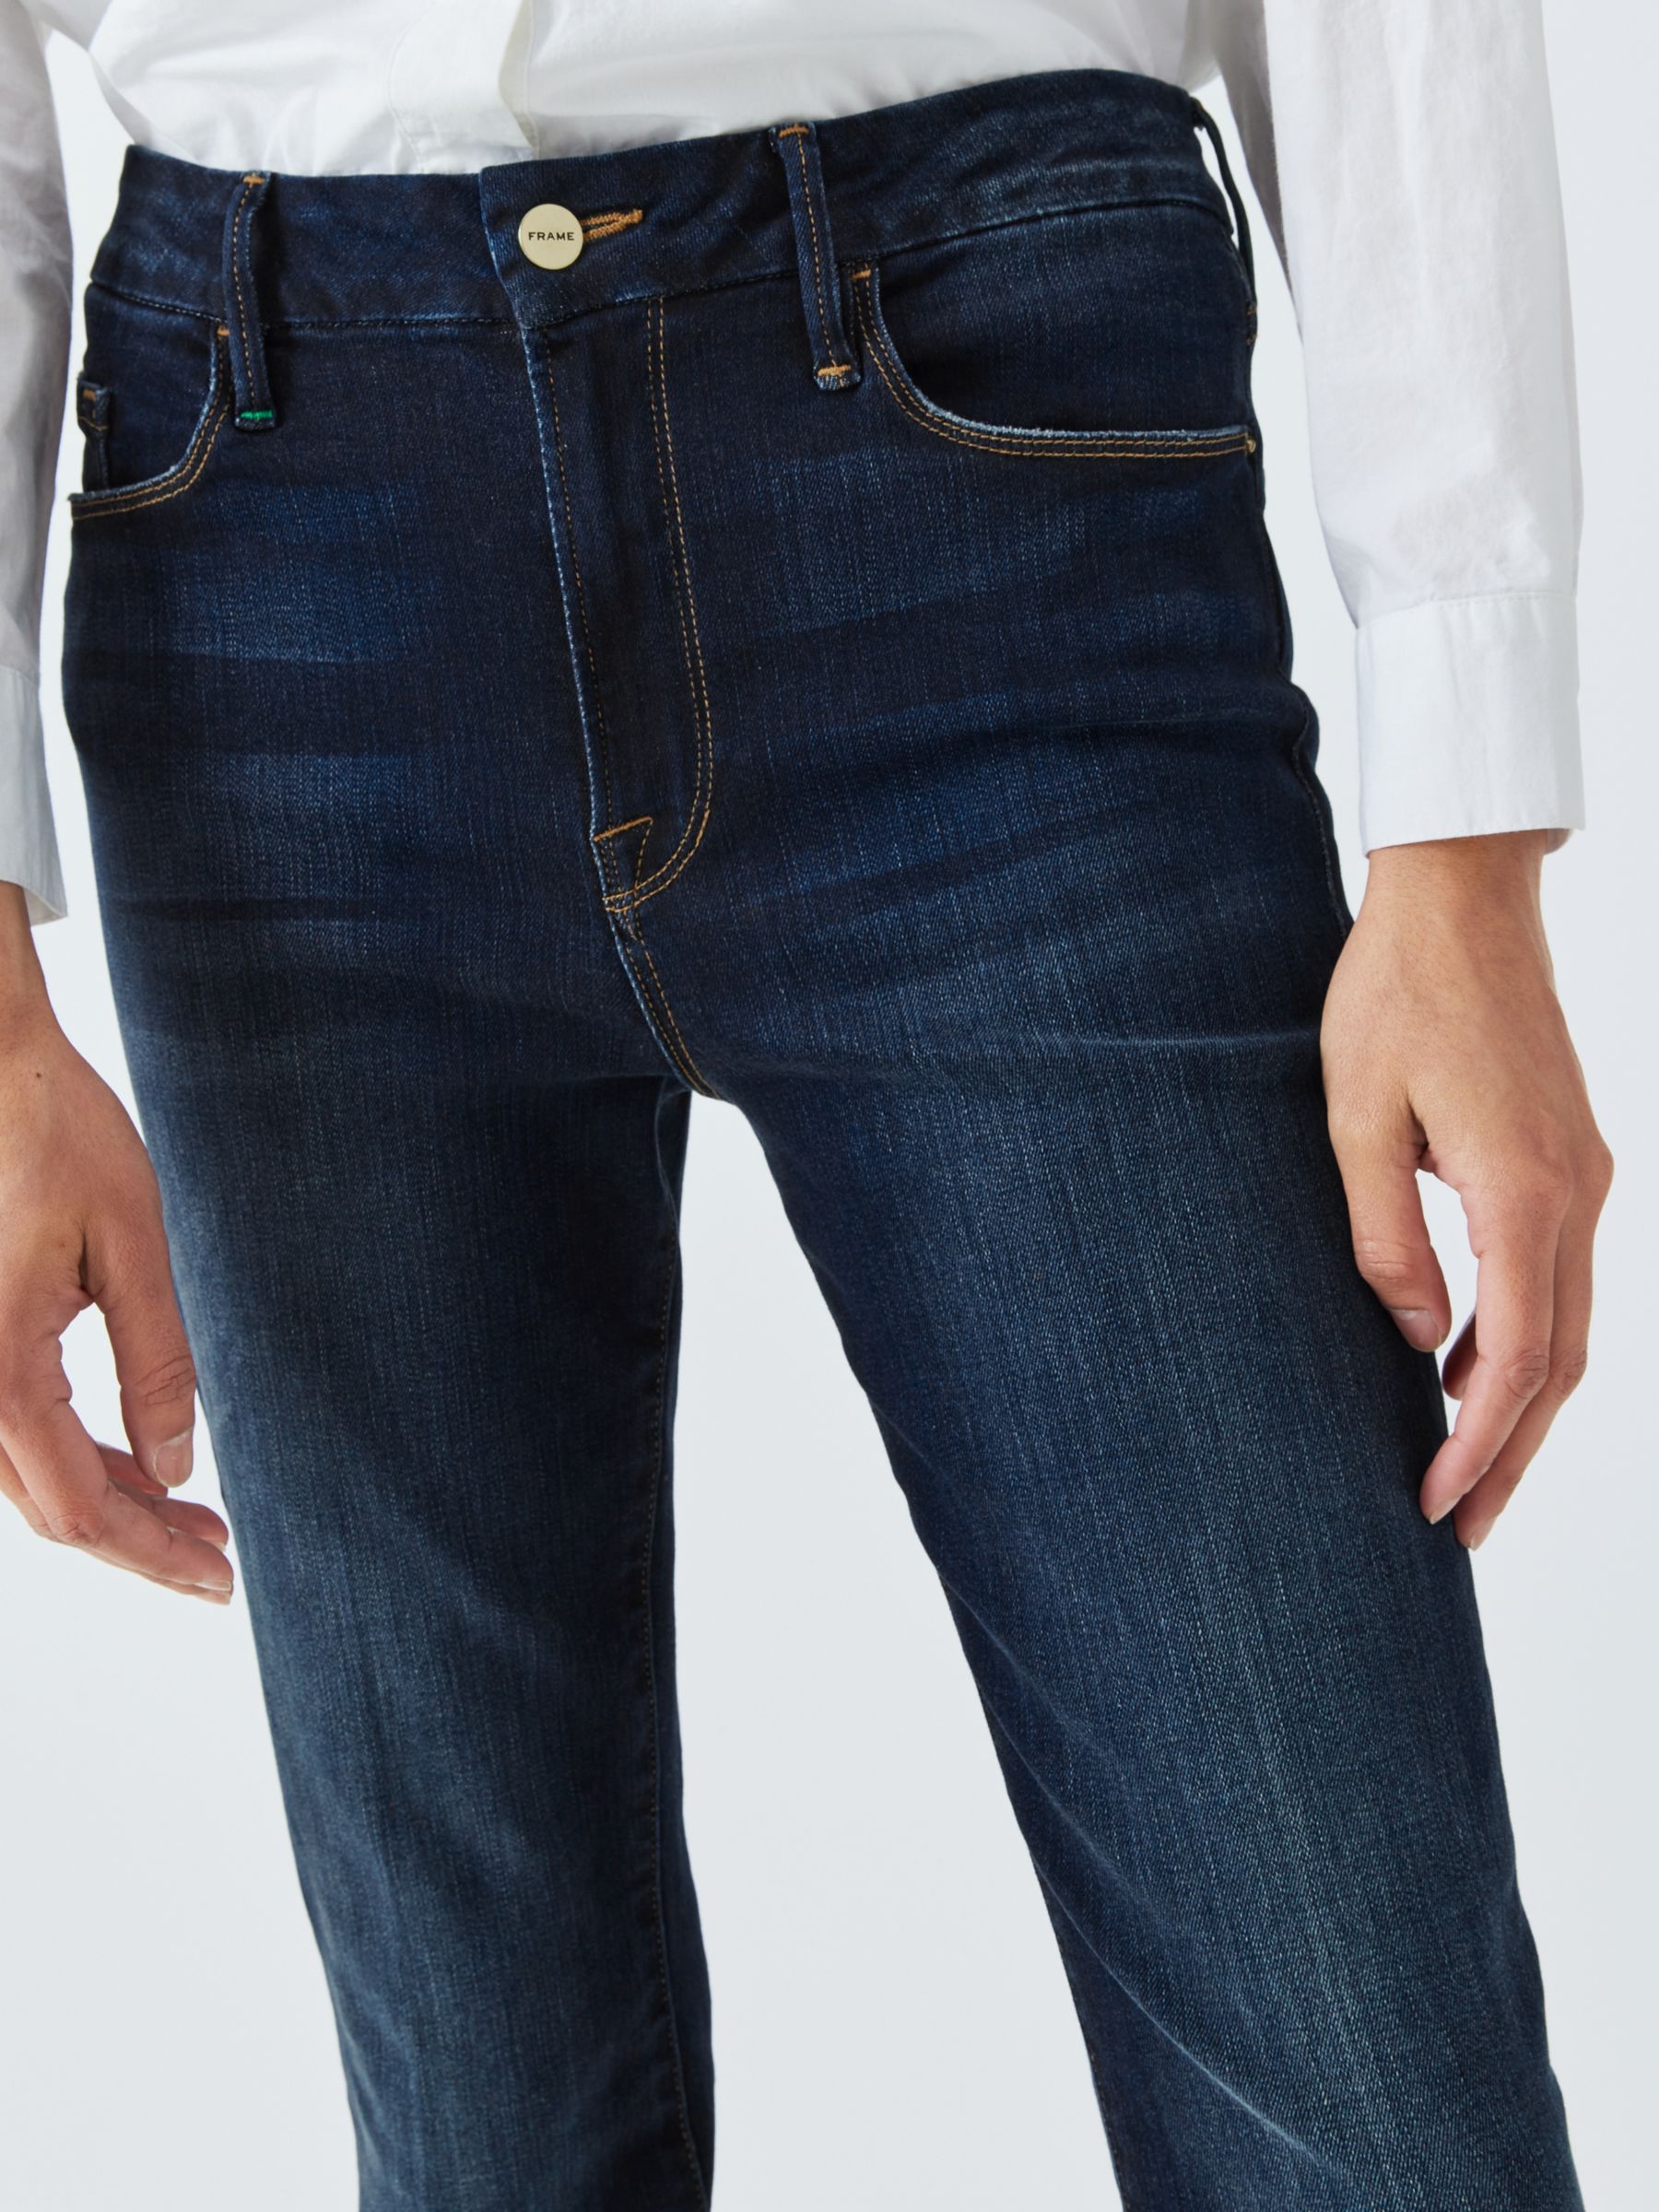 FRAME Le Mini Bootcut Jeans, Navy at John Lewis & Partners